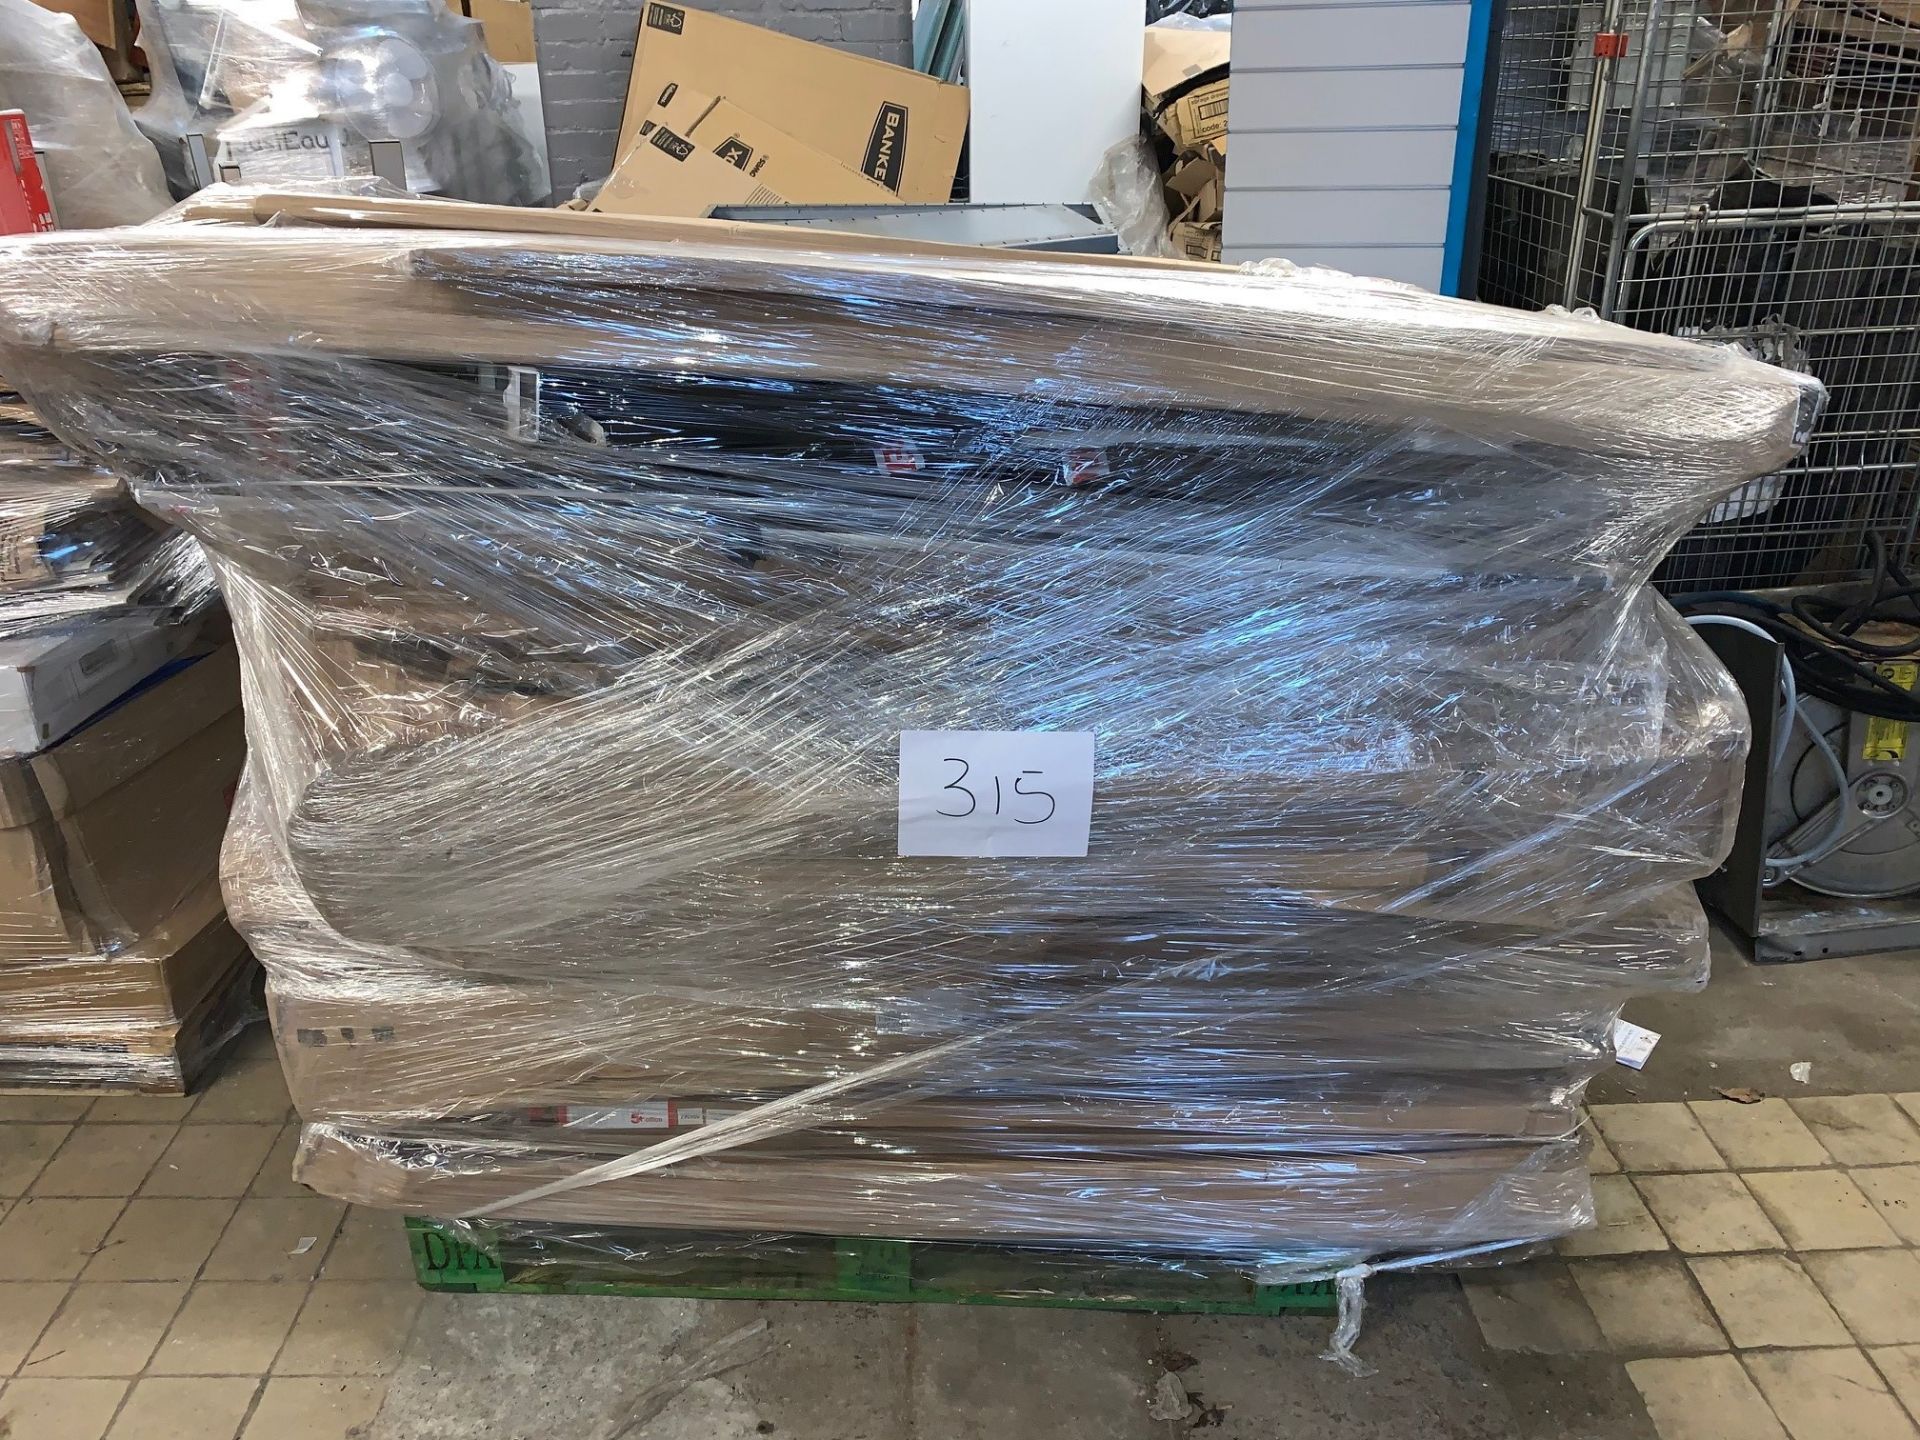 1 x Large Pallet of Mixed Whiteboards/Notice Boards